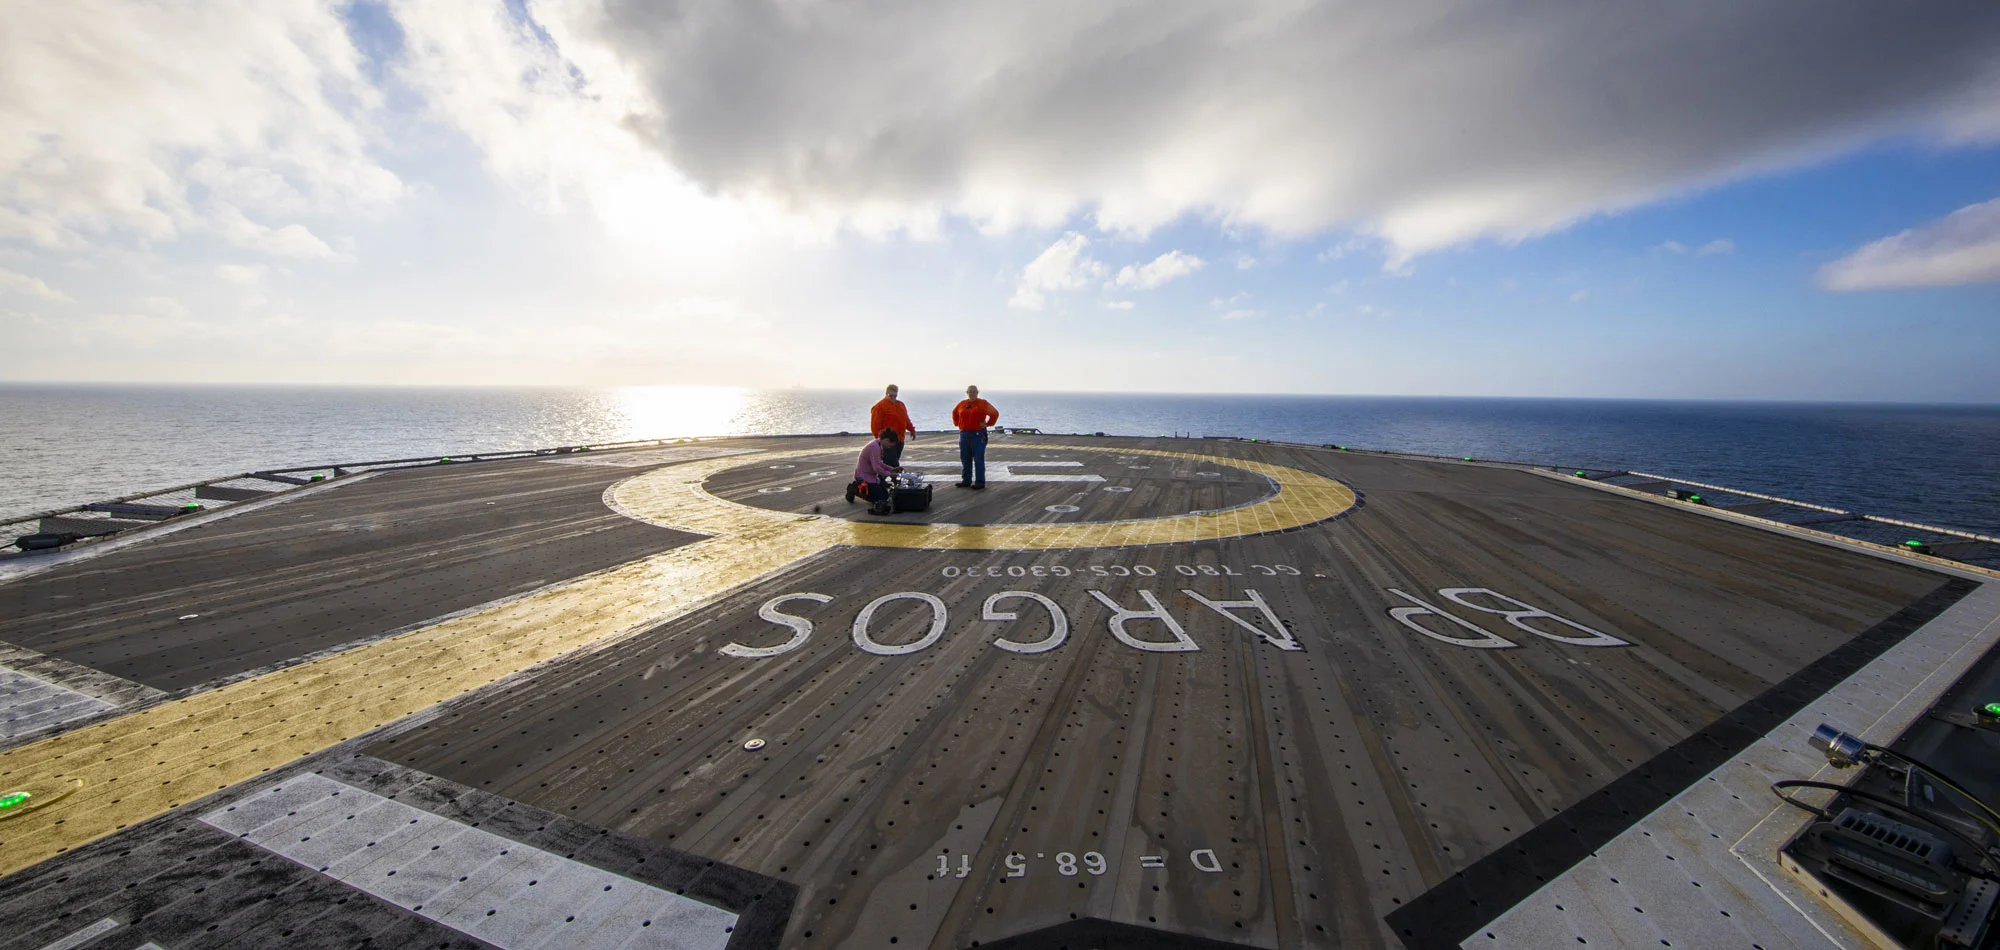 The helipad on the Argos platform in the Gulf of Mexico